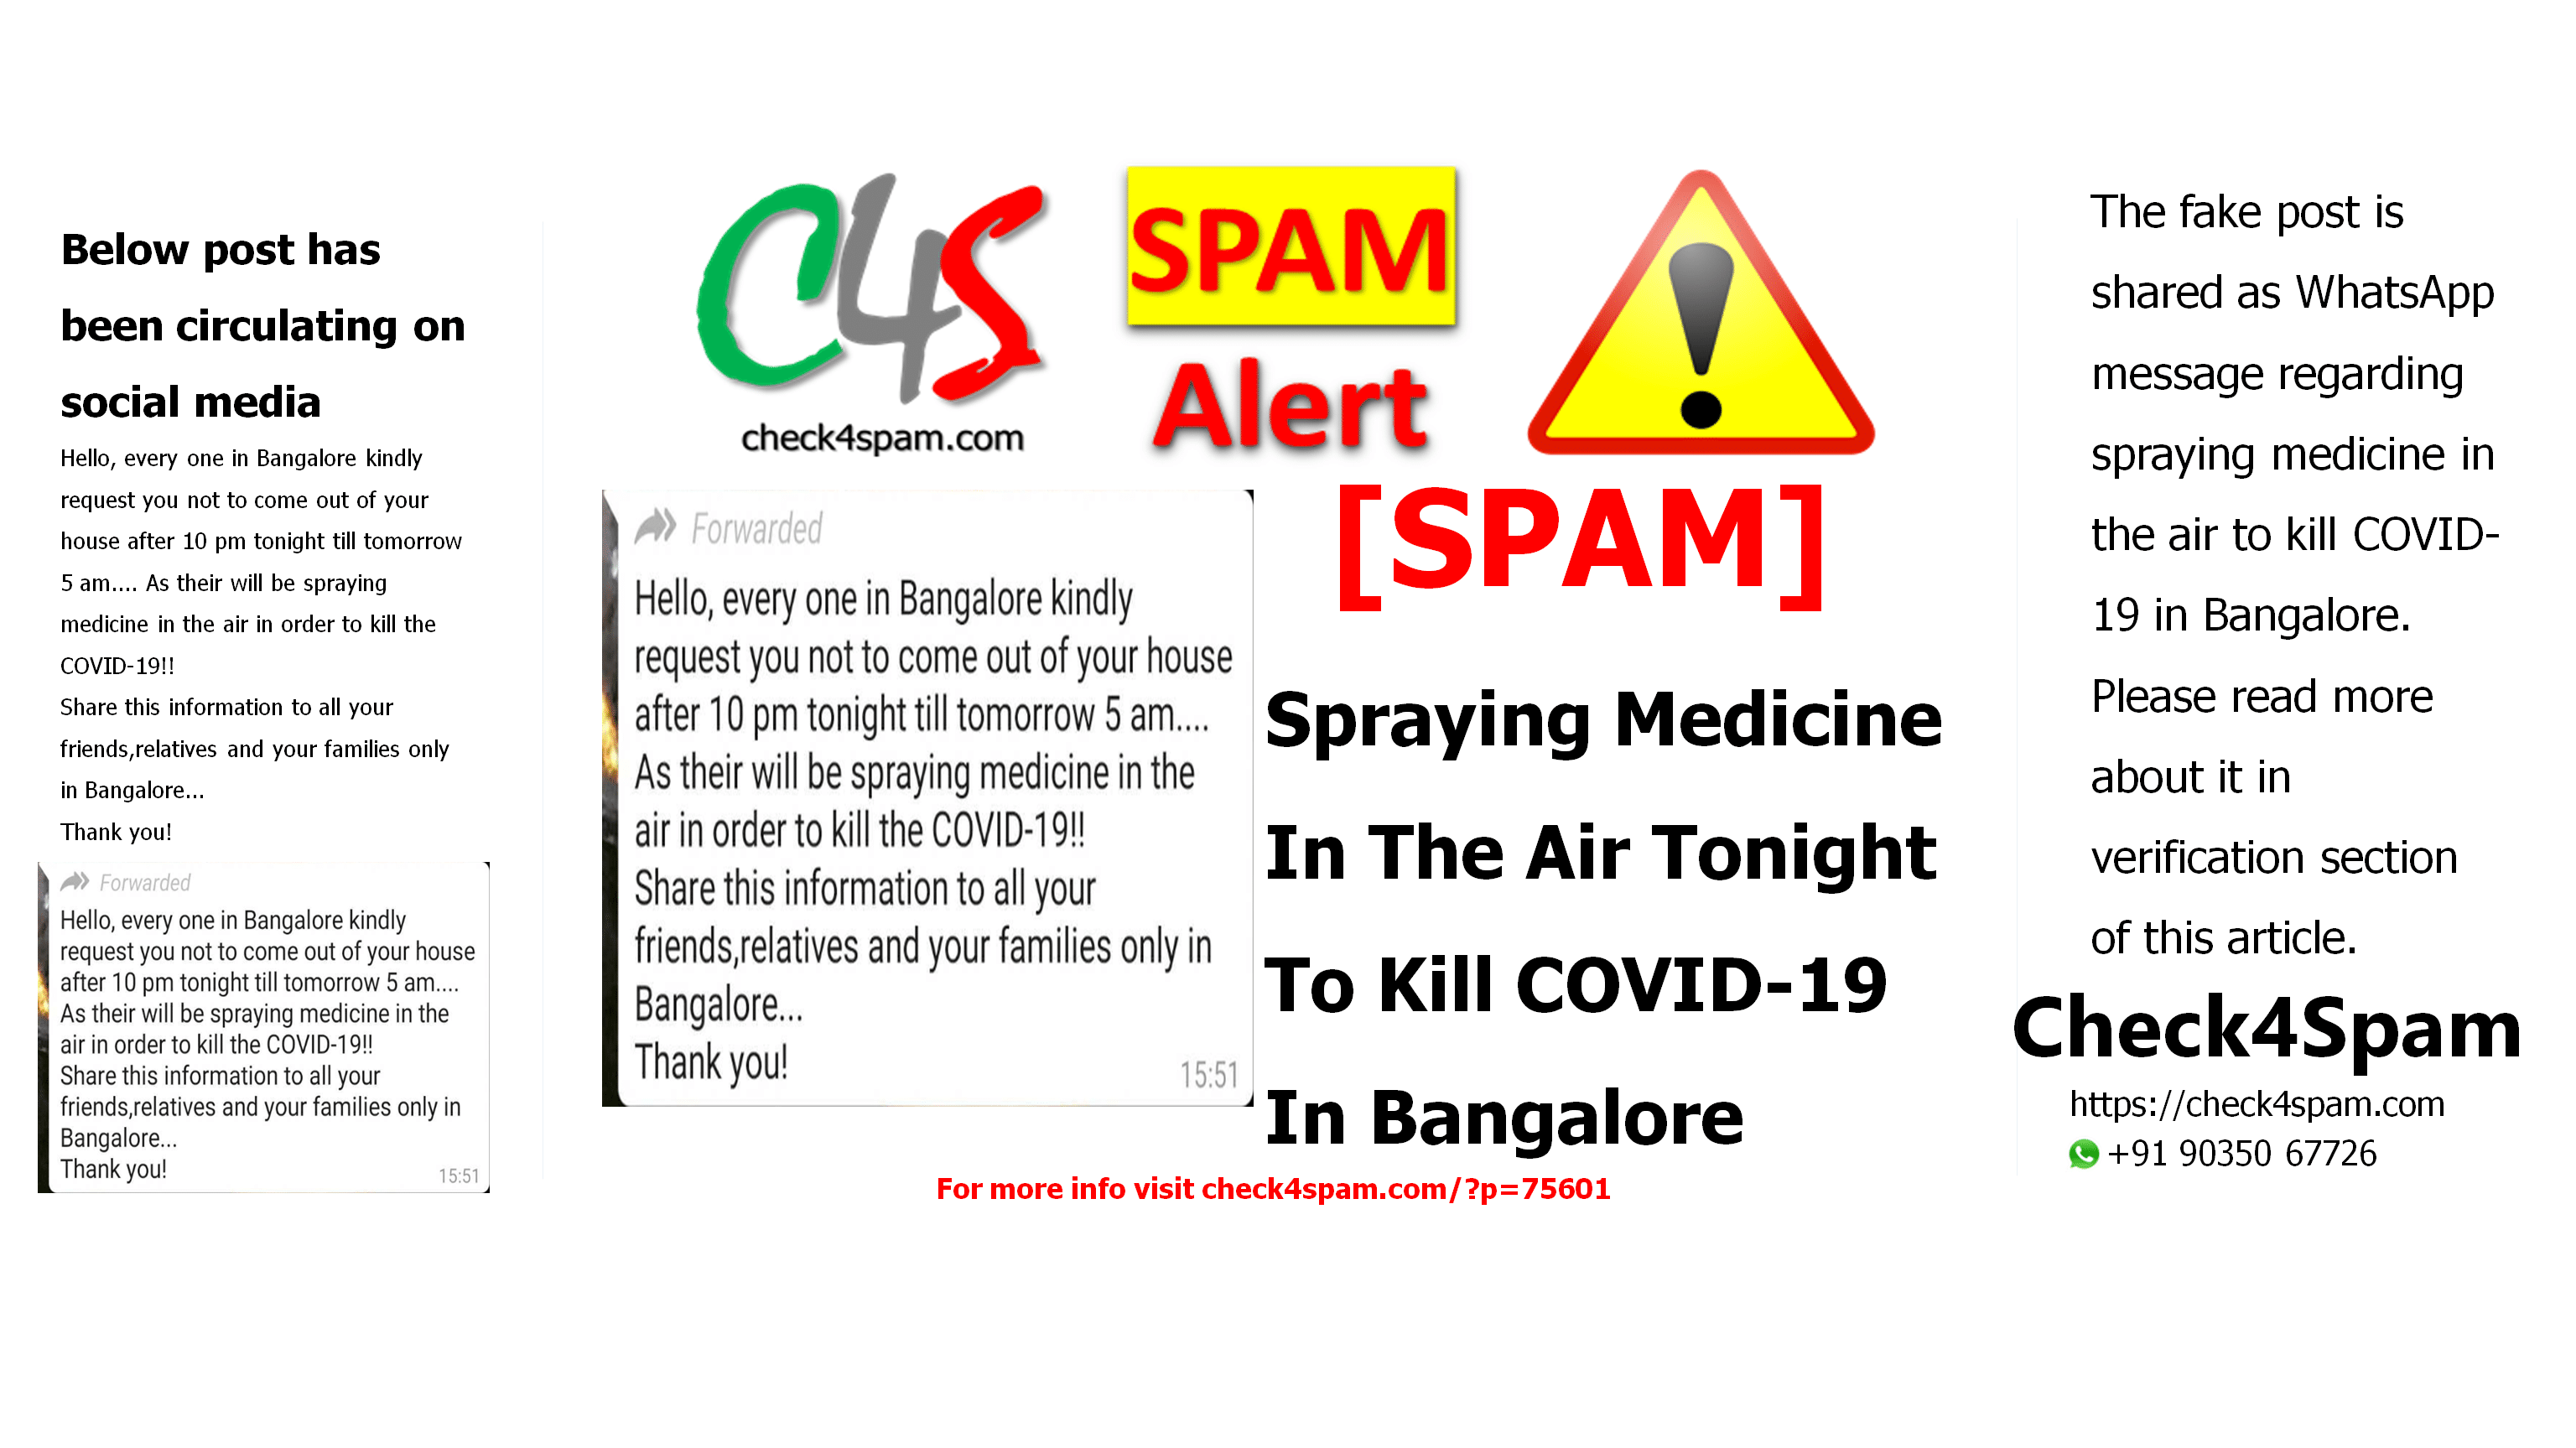 Spraying Medicine In The Air Tonight To Kill COVID-19 In Bangalore